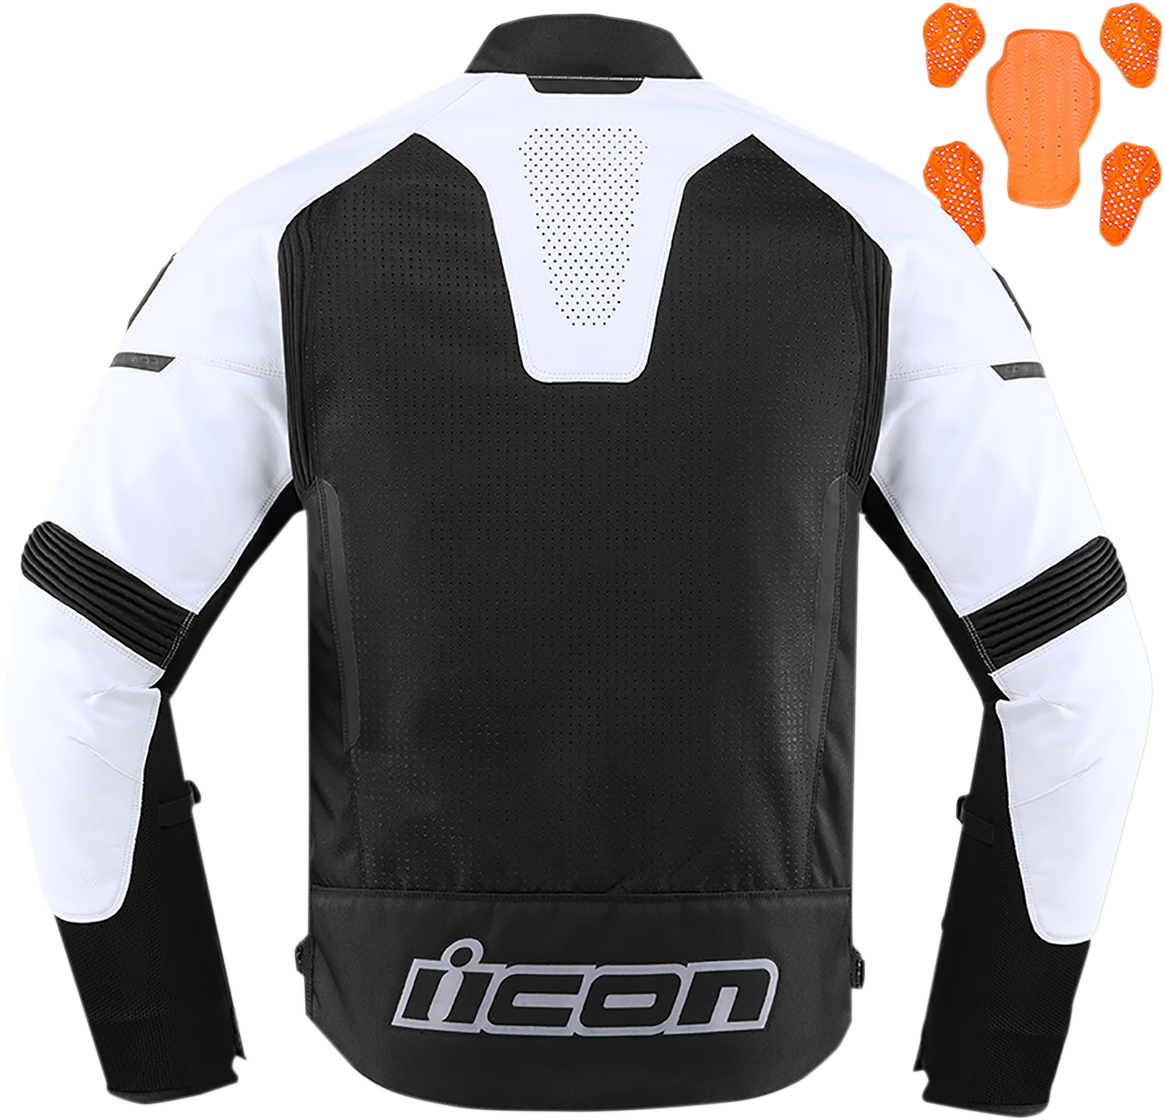 ICON Contract Perf CE Jacket - White - XL 2810-3669